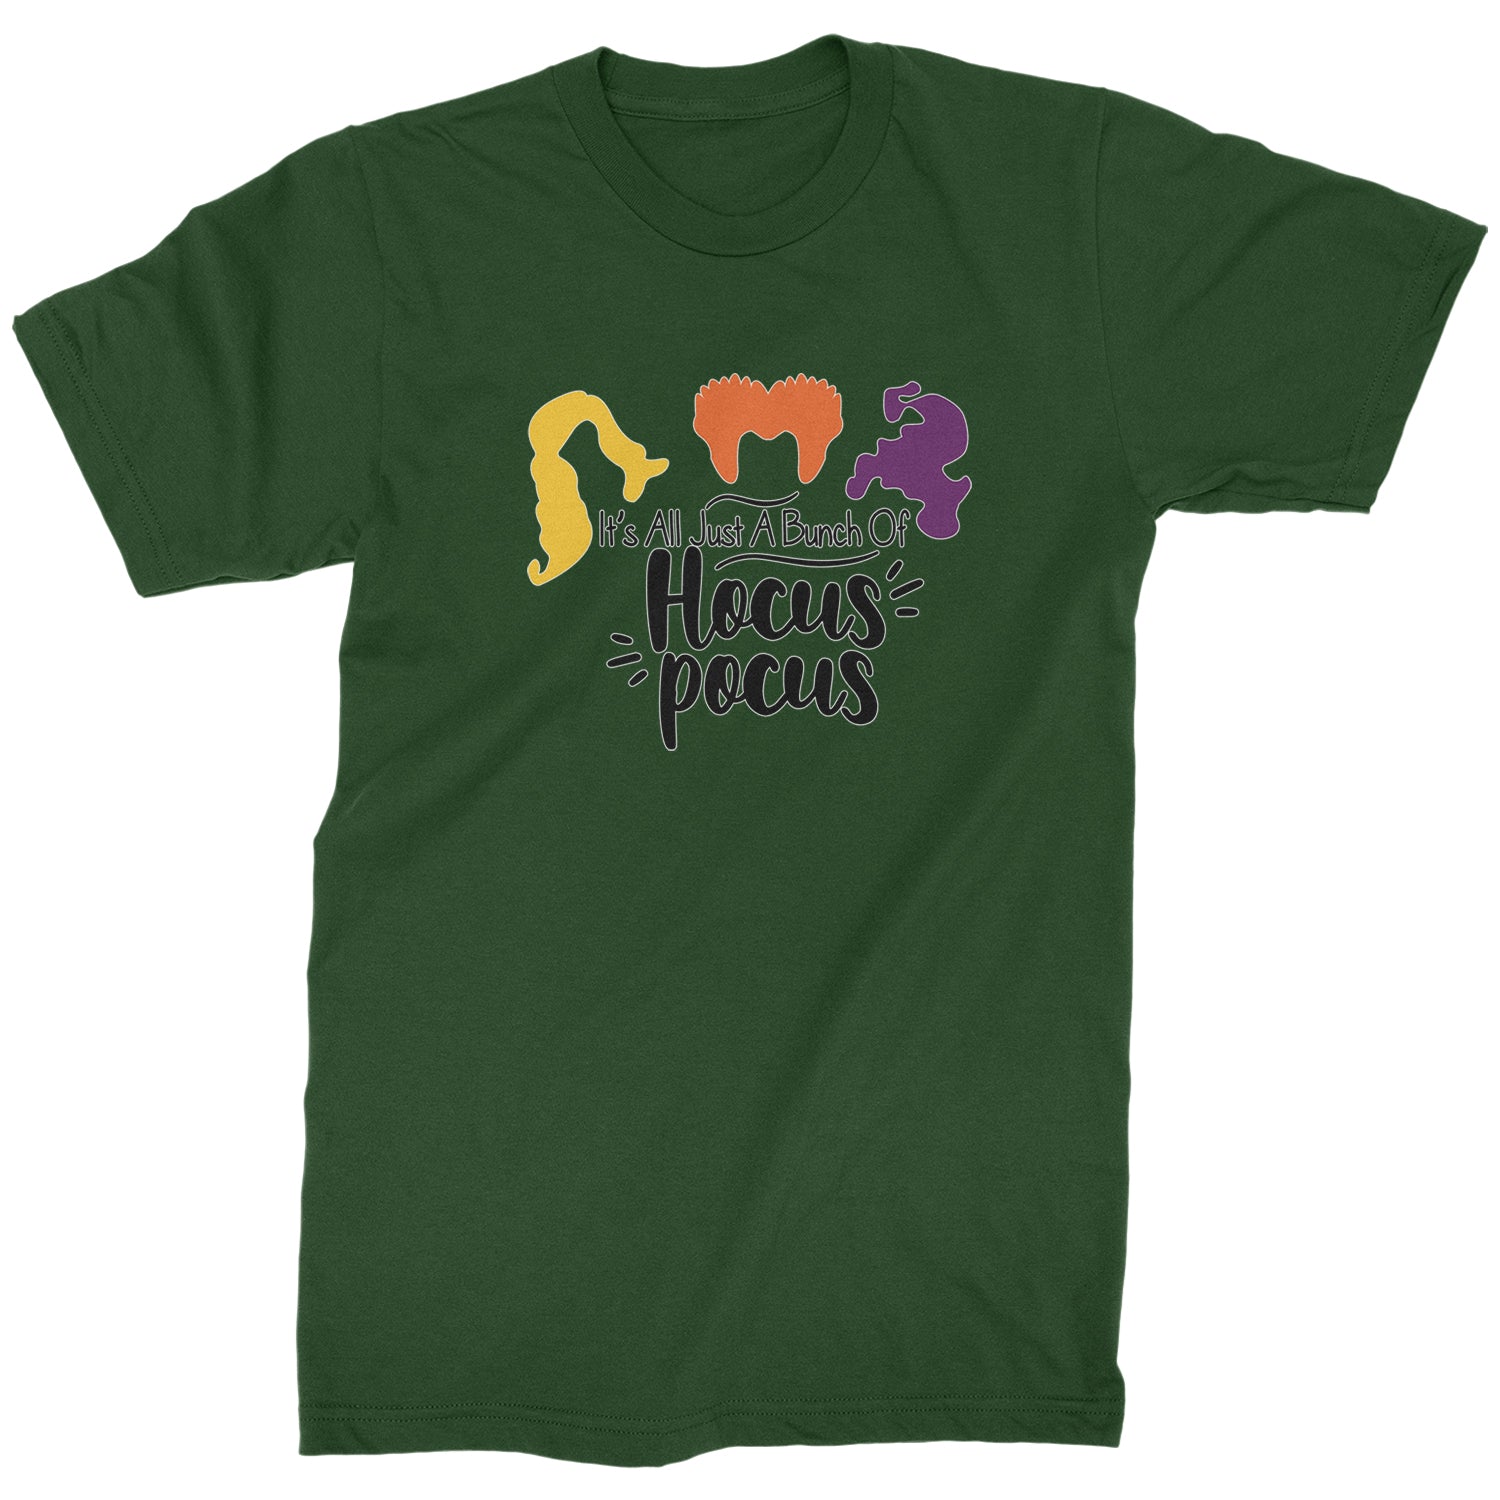 It's Just A Bunch Of Hocus Pocus Mens T-shirt descendants, enchanted, eve, hallows, hocus, or, pocus, sanderson, sisters, treat, trick, witches by Expression Tees